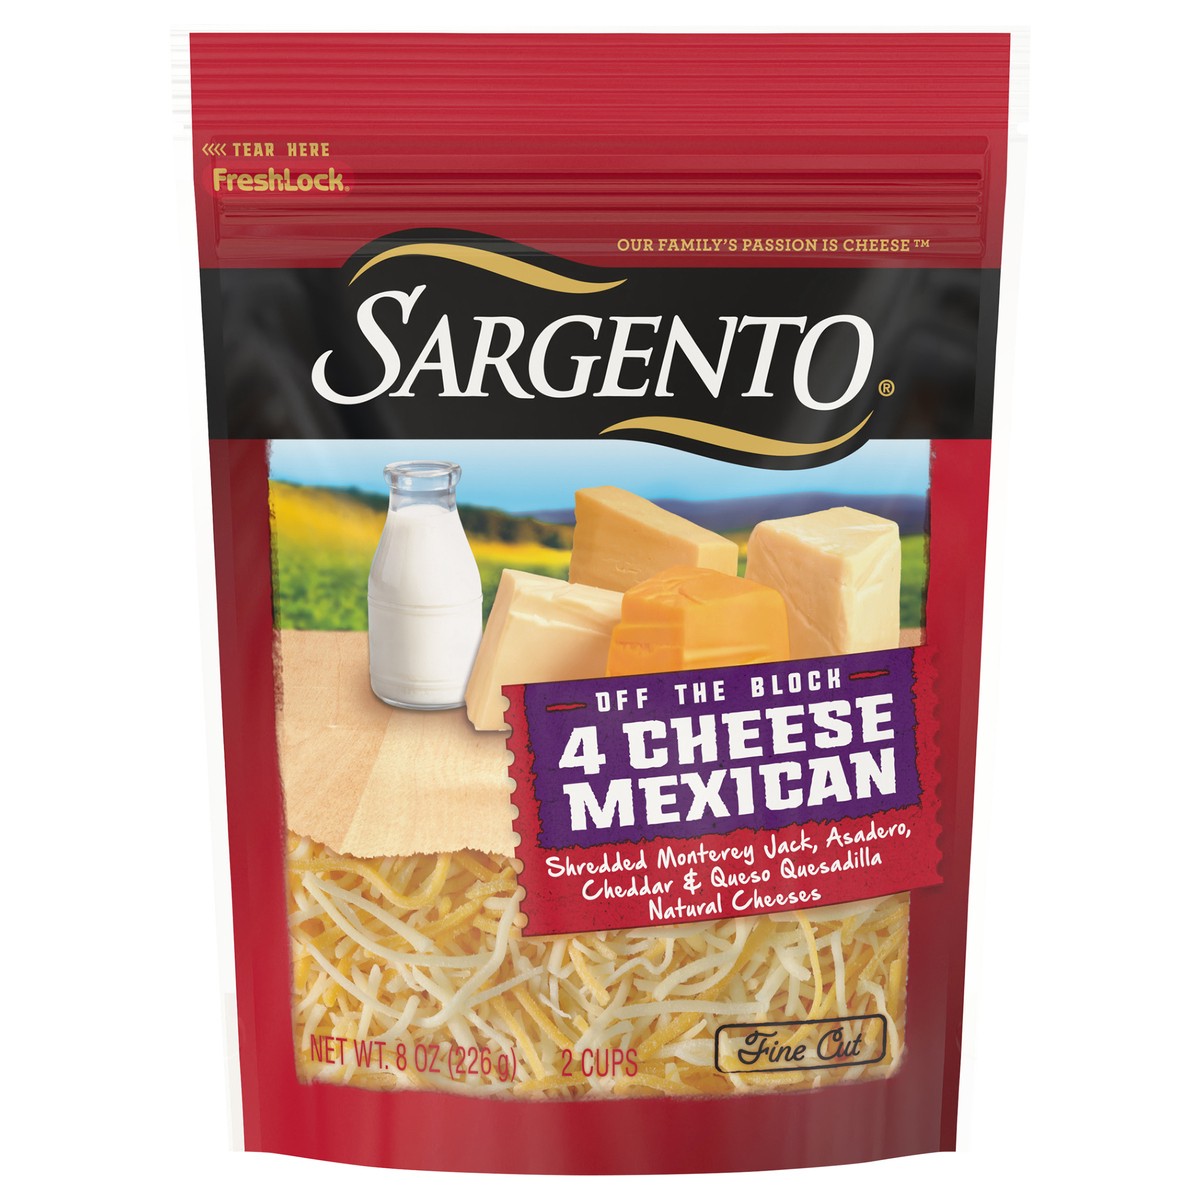 slide 1 of 23, Sargento Shredded 4 Cheese Mexican Natural Cheese, Fine Cut, 8 oz., 8 oz